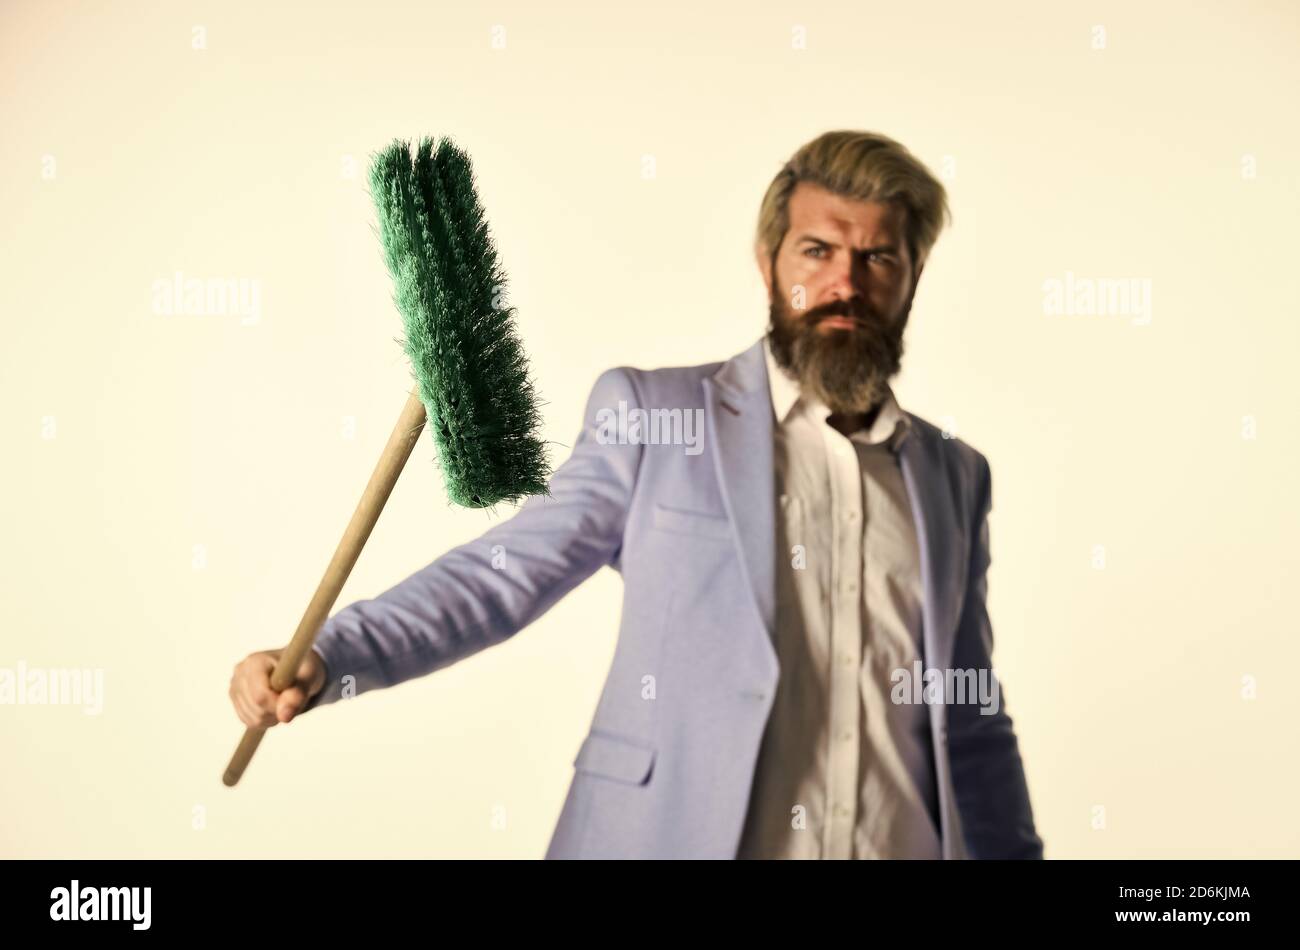 Qualified. Personnel shifts. New responsibilities. Demotion concept. Crisis and unemployment. I agree to any work. Businessman hold broom. Financial crisis concept. Global crisis and unemployment. Stock Photo